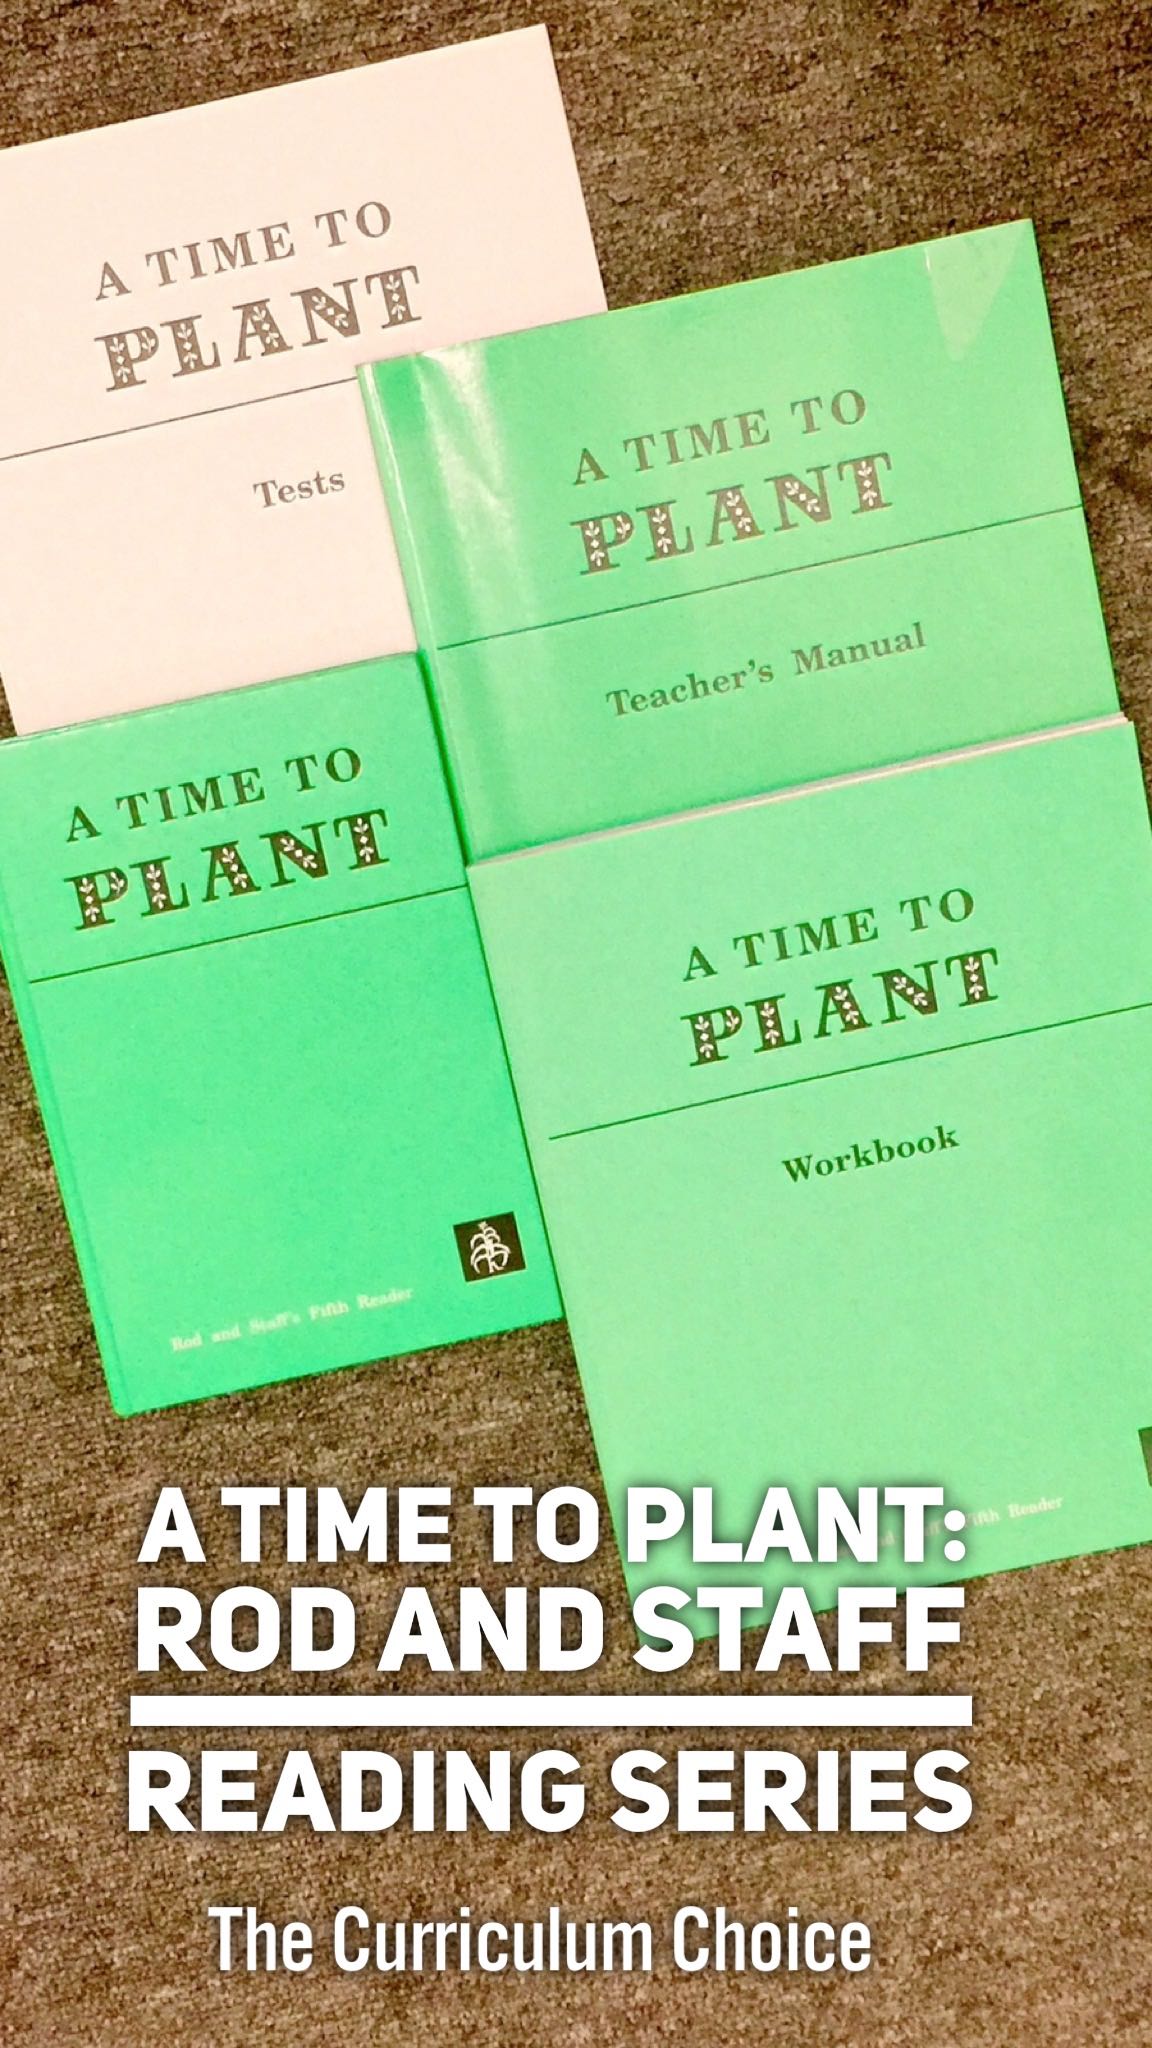 A time to plant is a wonderful reading series from Rod and Staff for grade 5 leveled learners. It integrates writing and vocabulary skills.